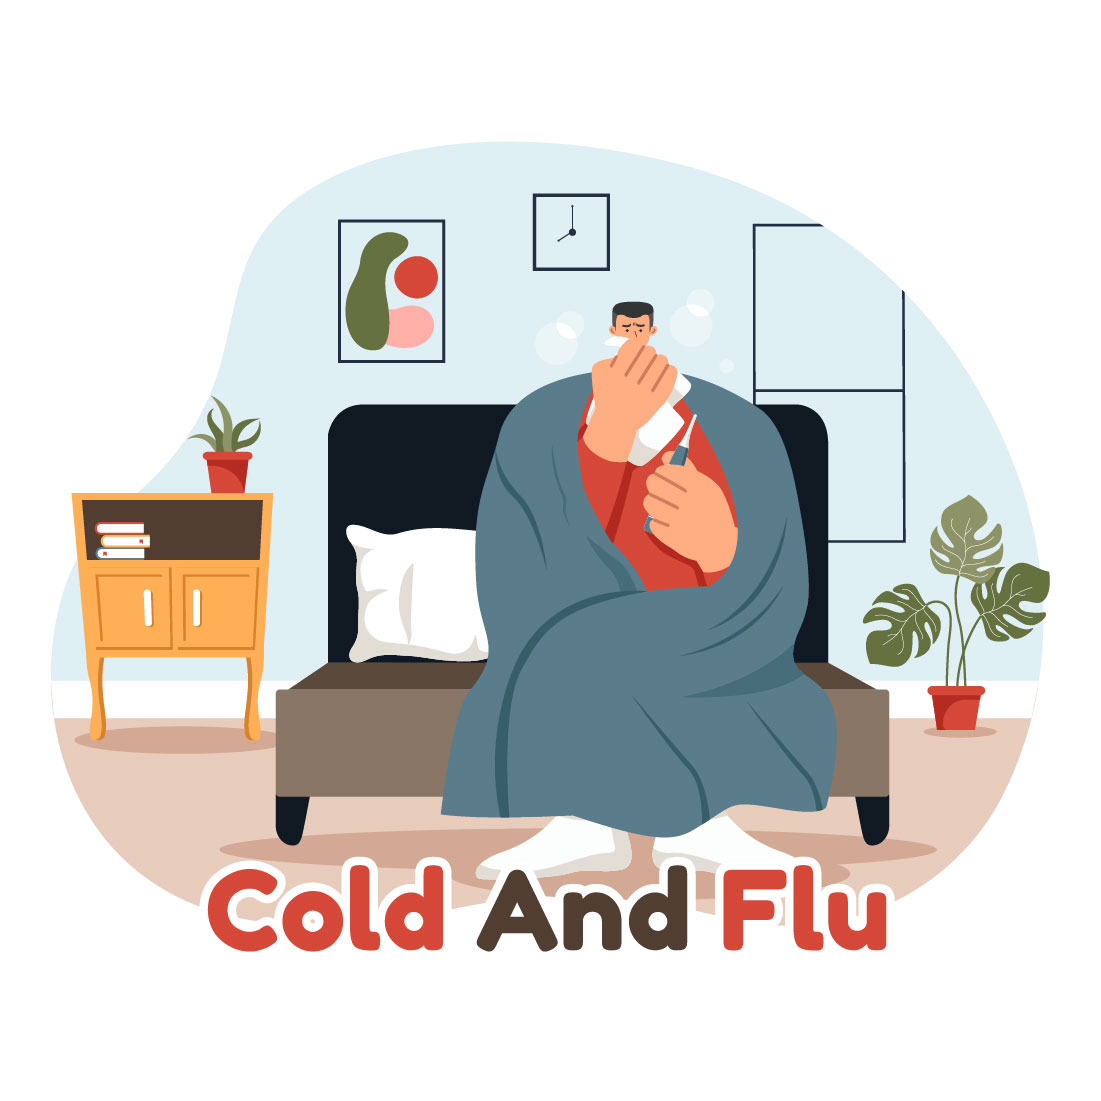 9 Flu and Cold Illustration cover image.